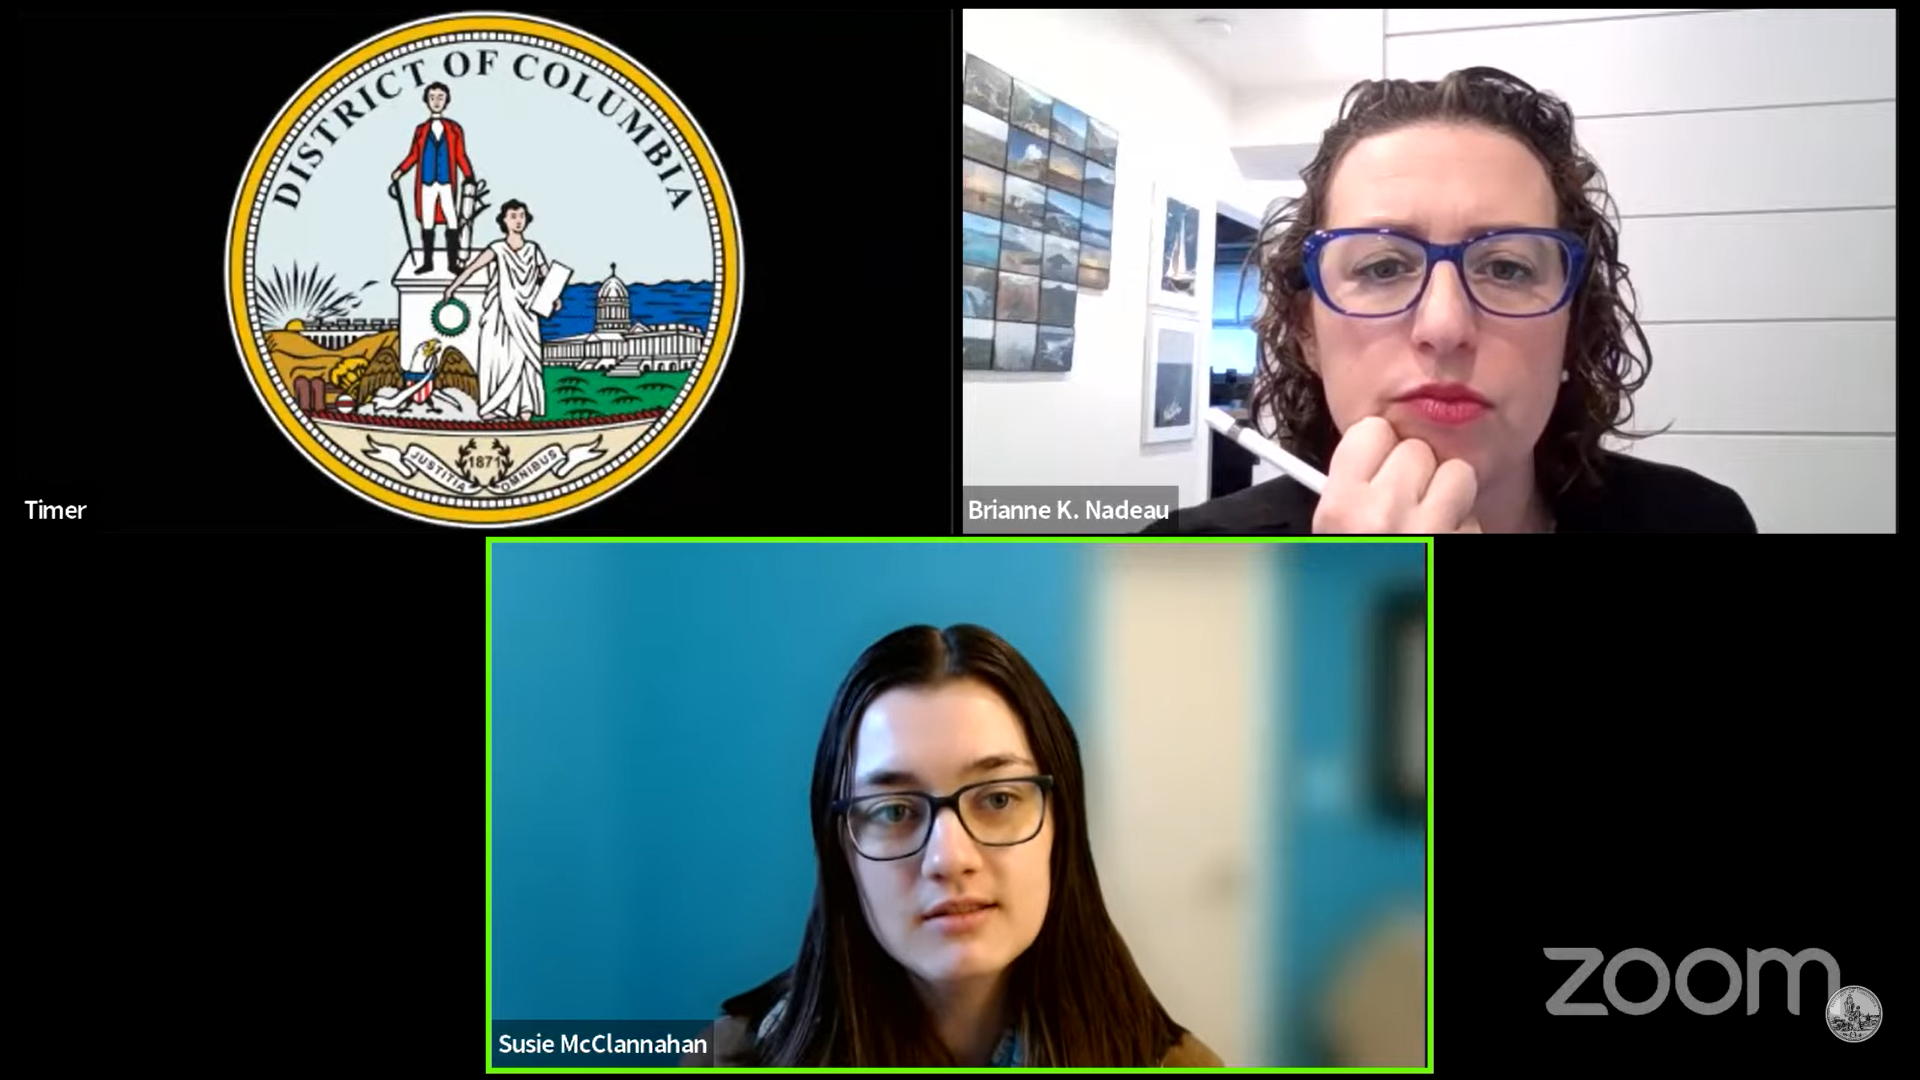 A screenshot of the virtual testimony showing ERC Fair Housing Rights Program Manager Susie McClannahan speaking to DC Councilmember Brianne K. Nadeau.